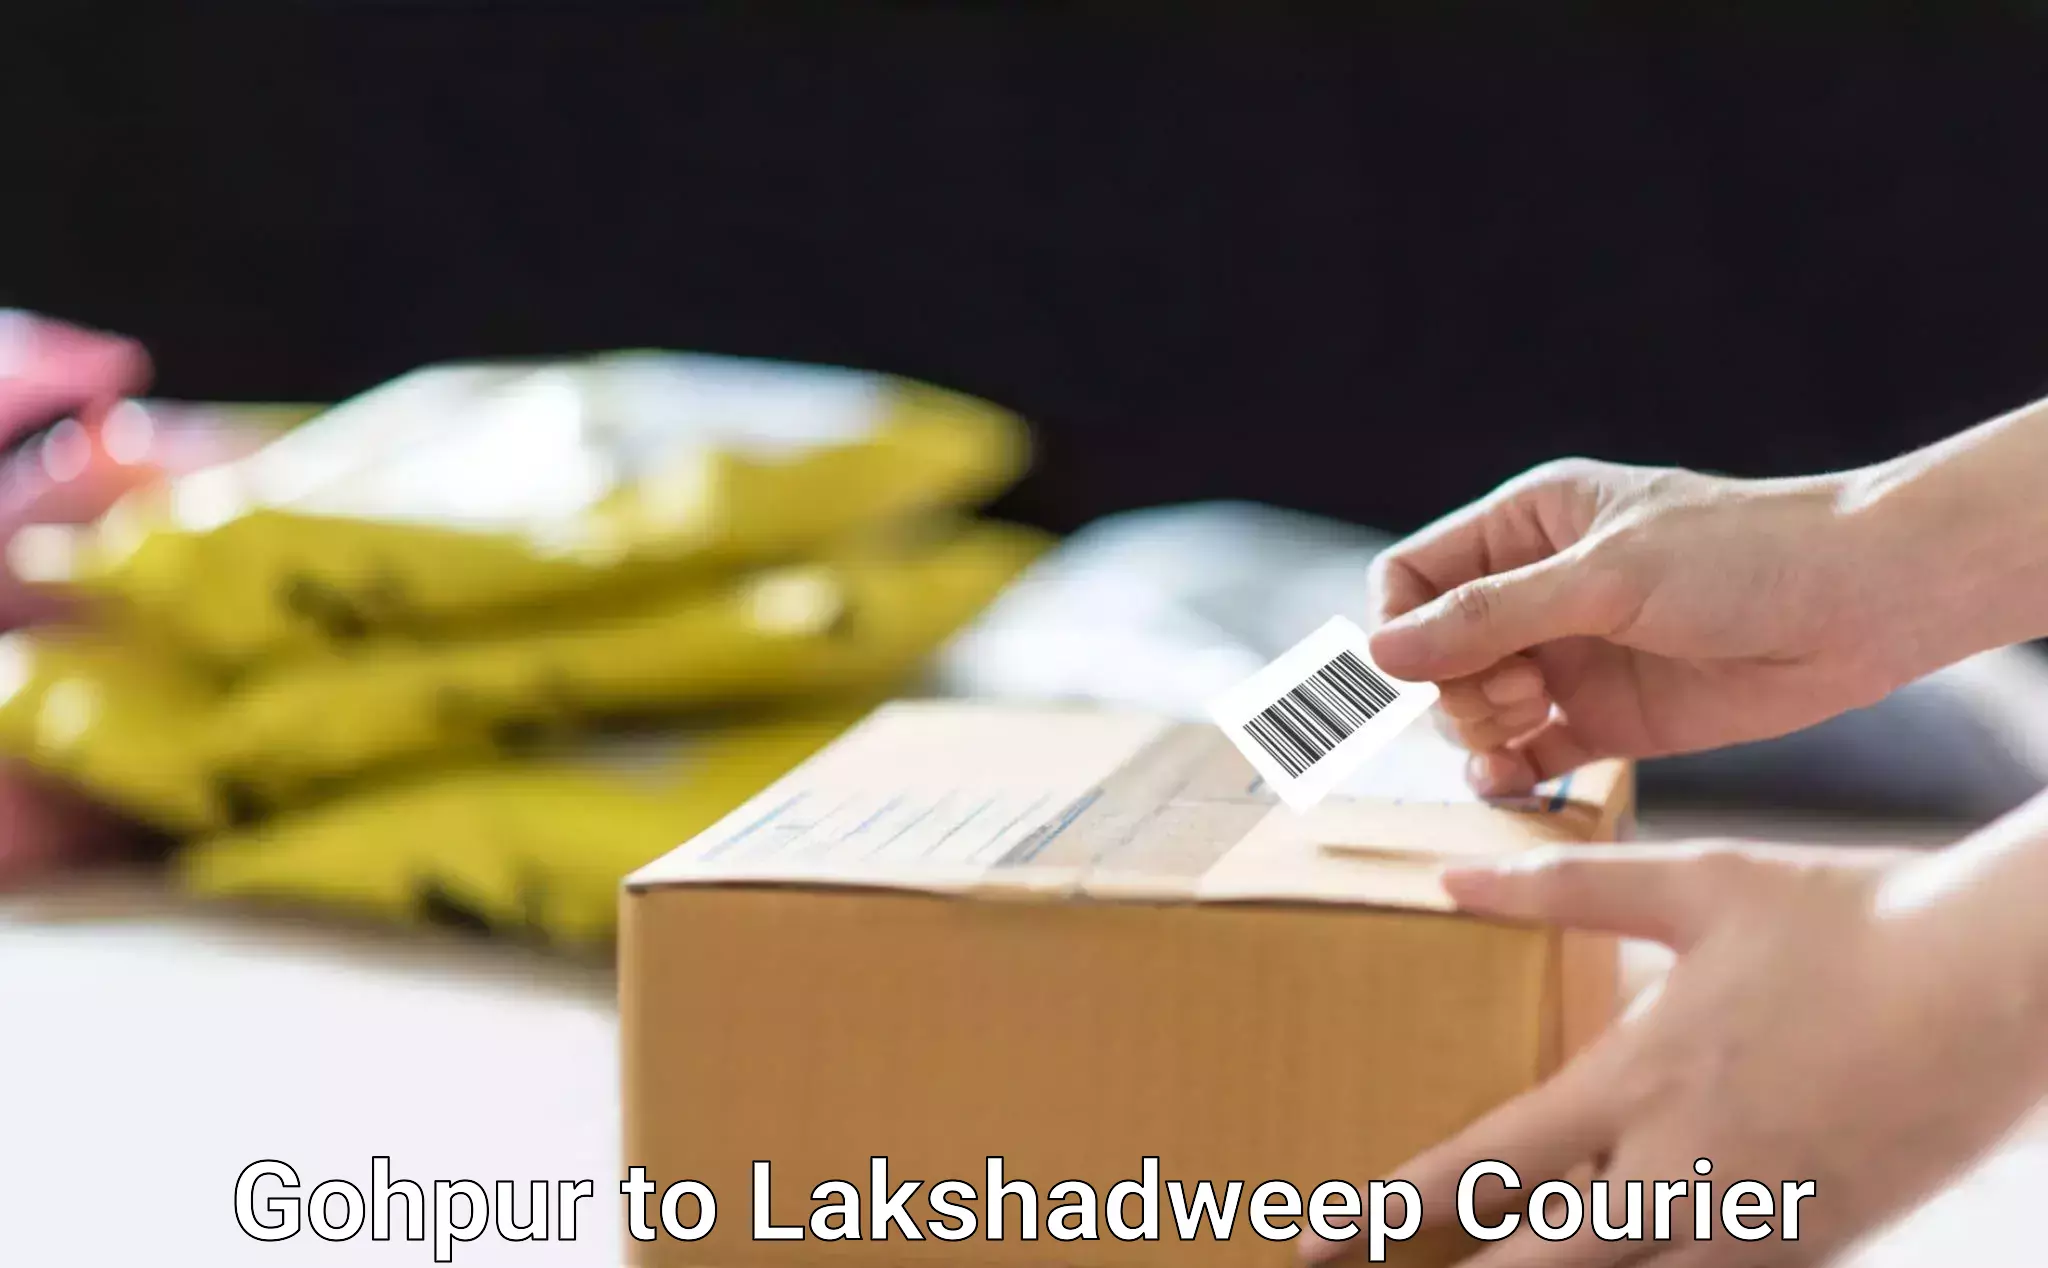 Air courier services Gohpur to Lakshadweep